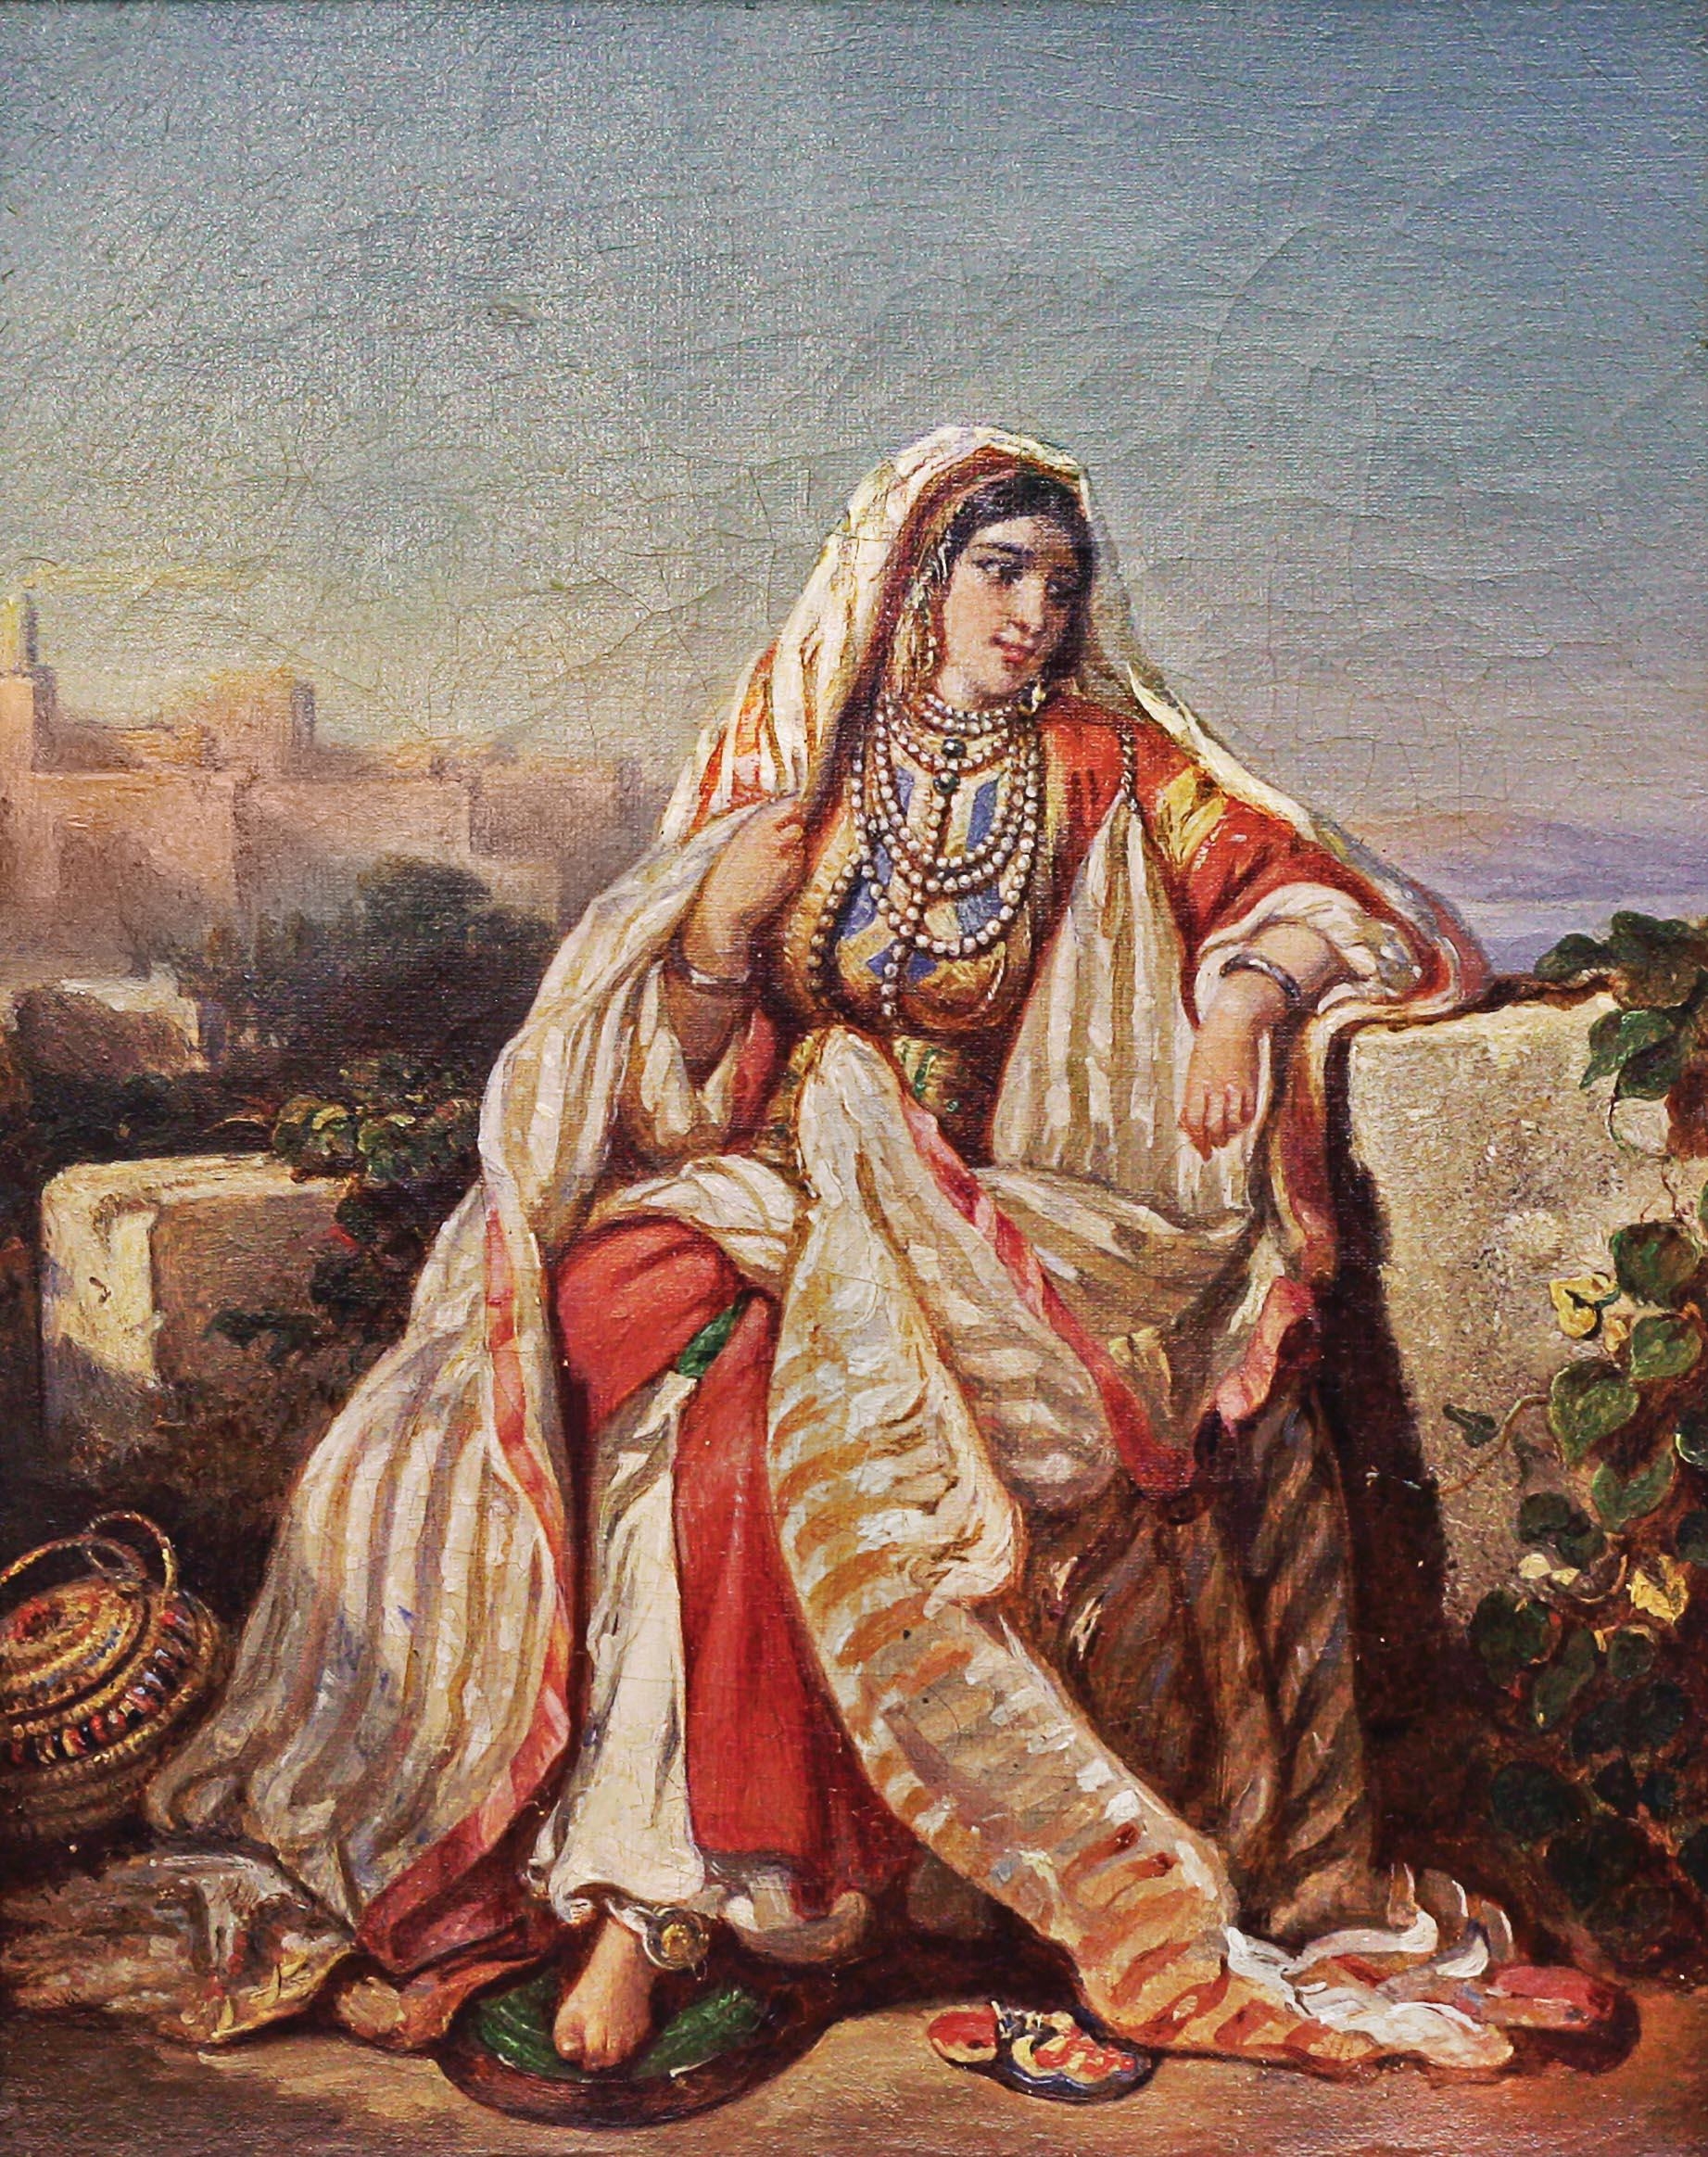 Auguste Delacroix, Jewish woman in traditional clothing (1834)